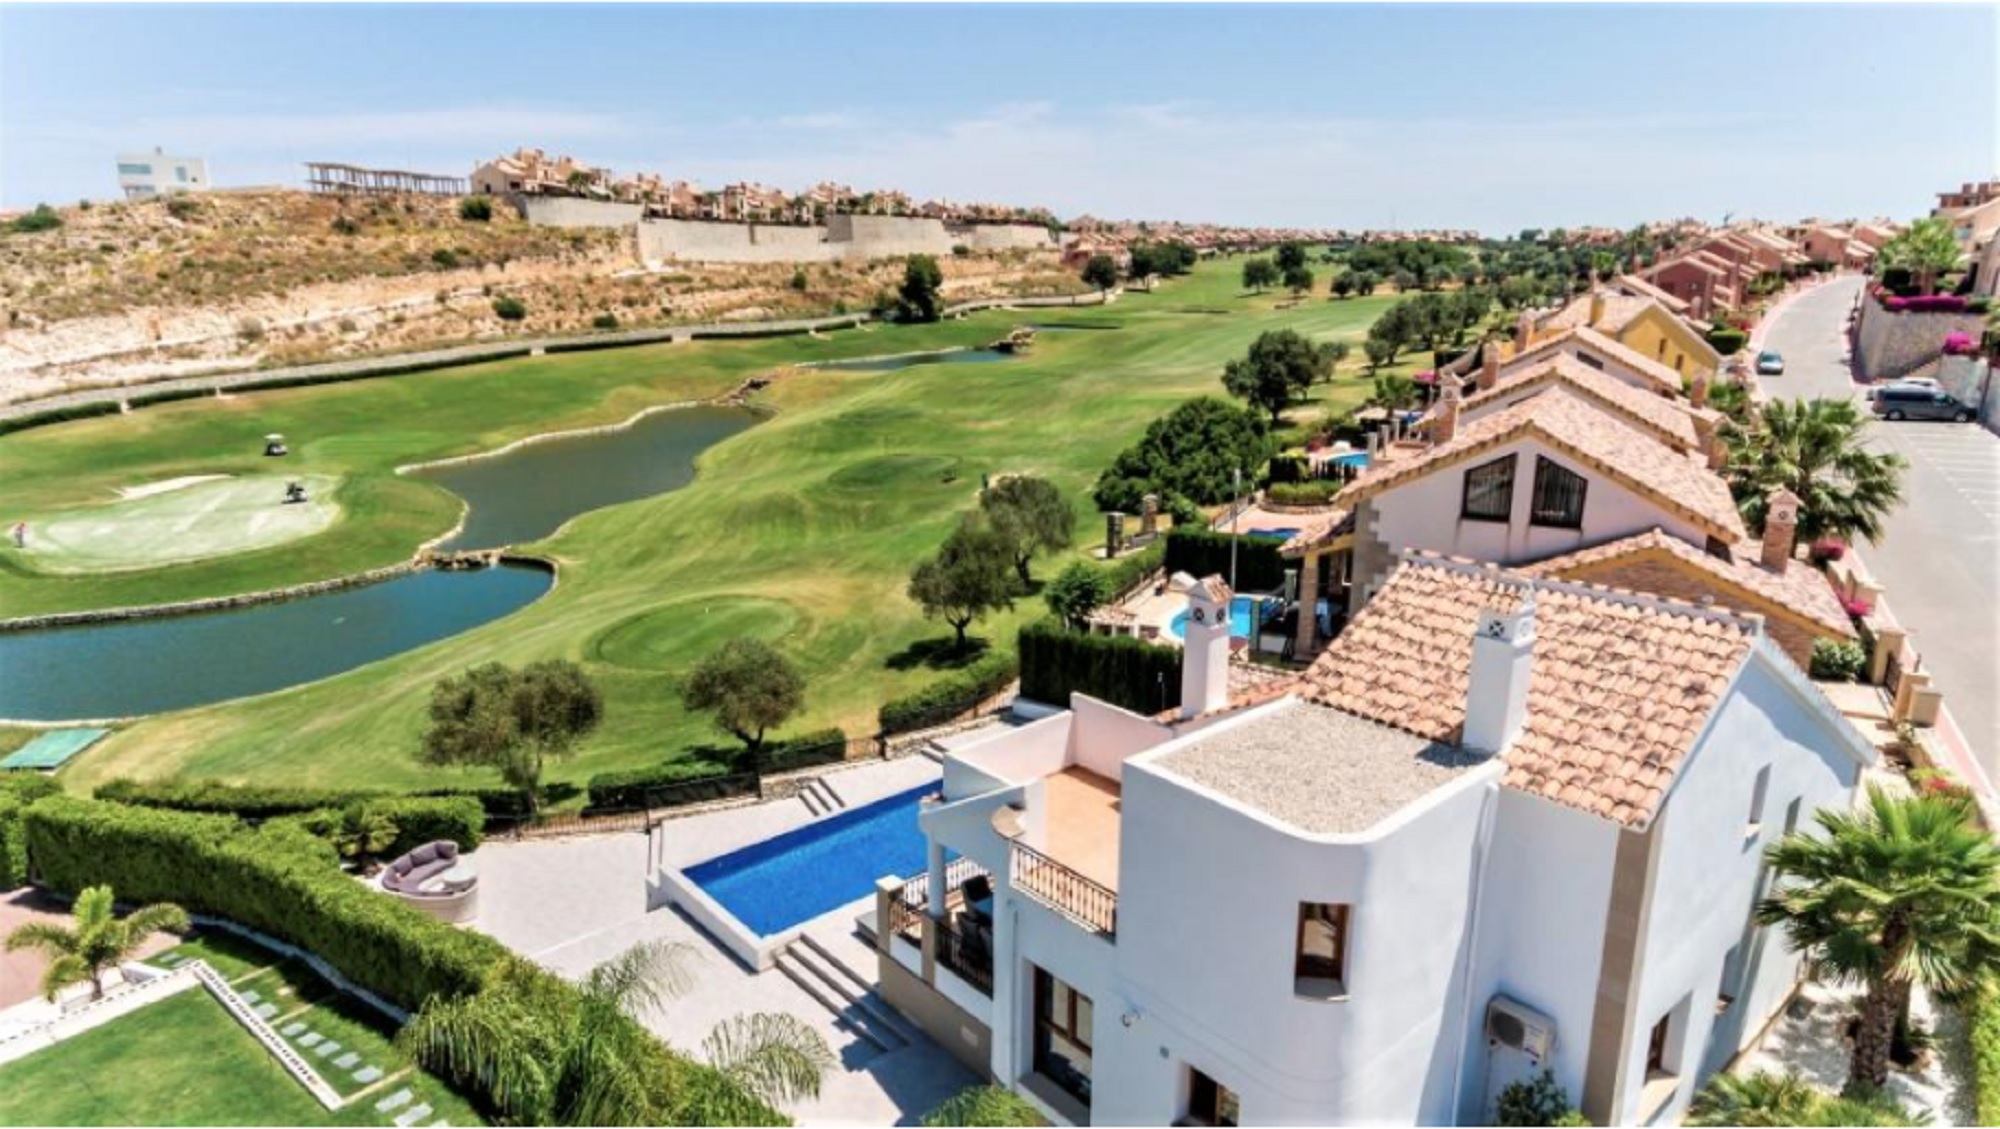 10 Things You Should Know When Buying a Golf Home in La Finca, Spain